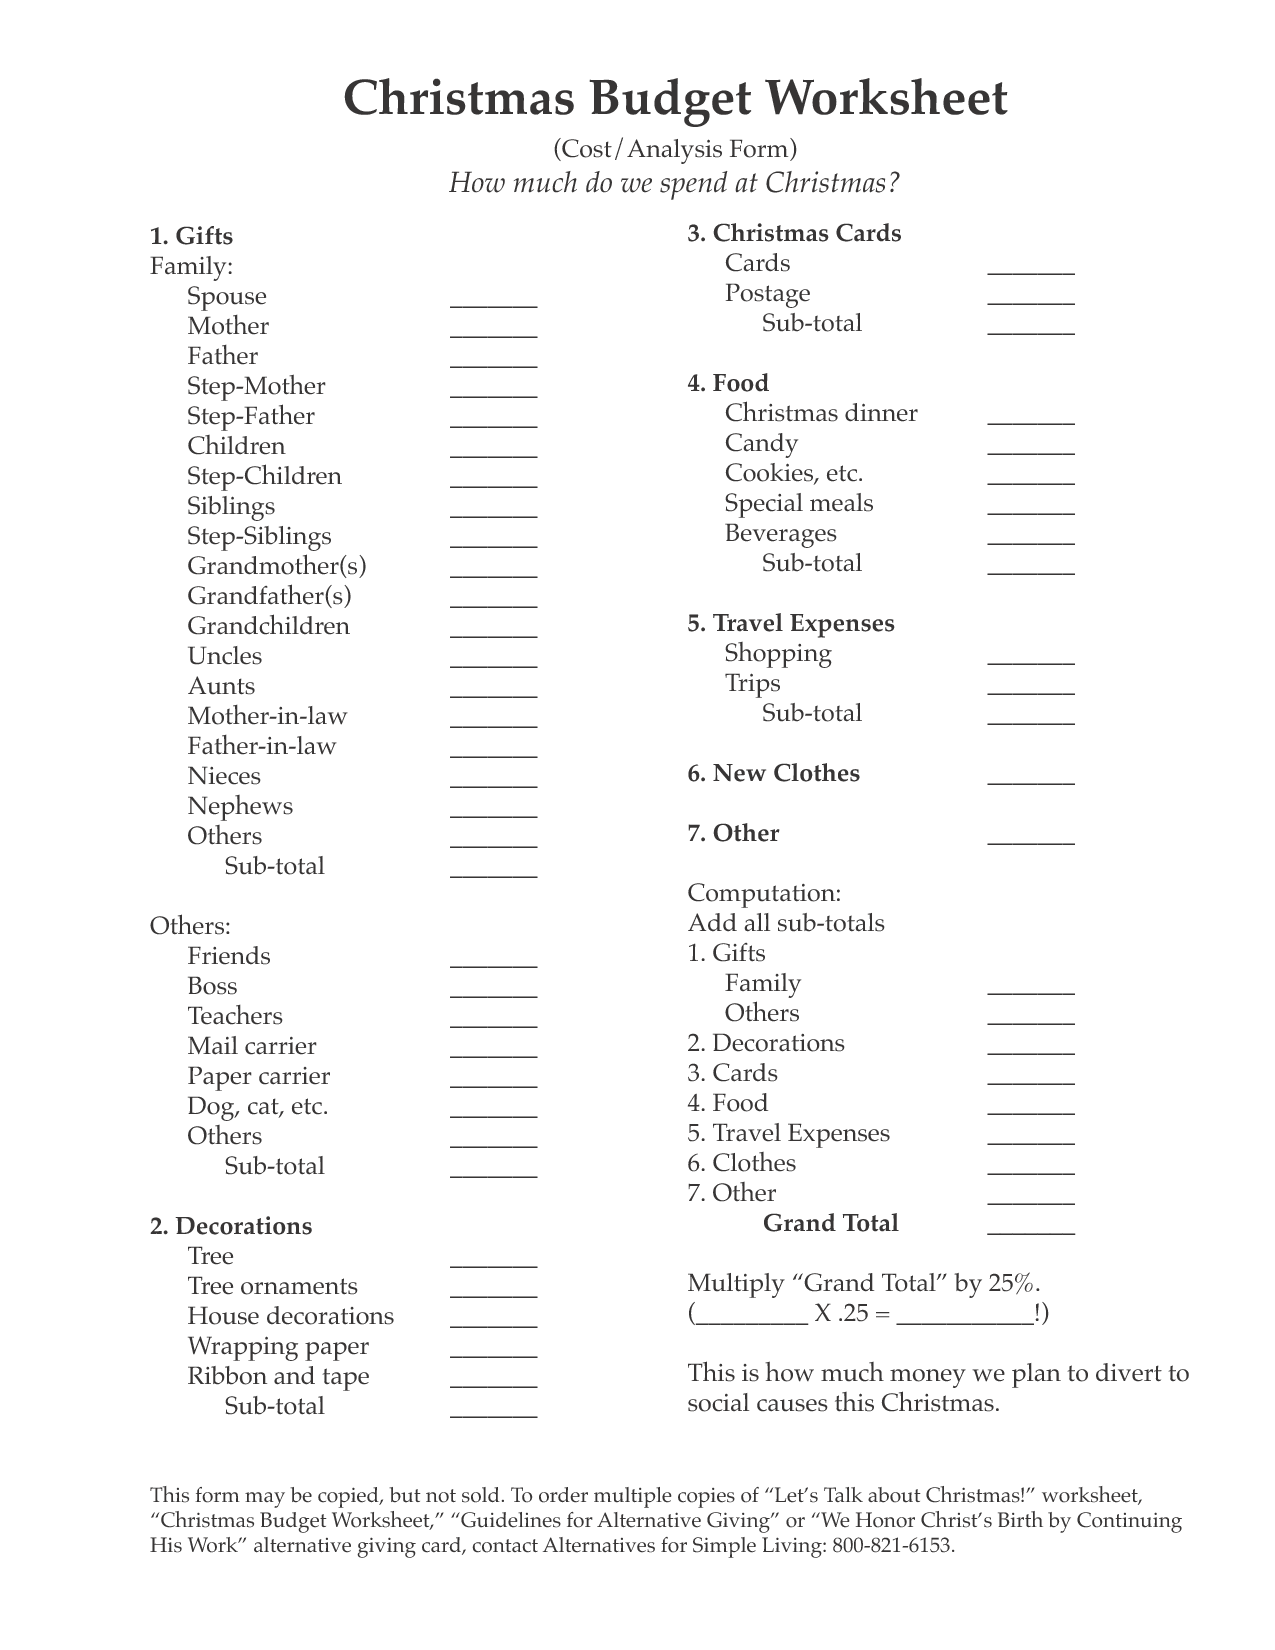 14 Best Images Of Grocery Shopping Budget Worksheet Grocery Math Lesson Worksheet Grocery